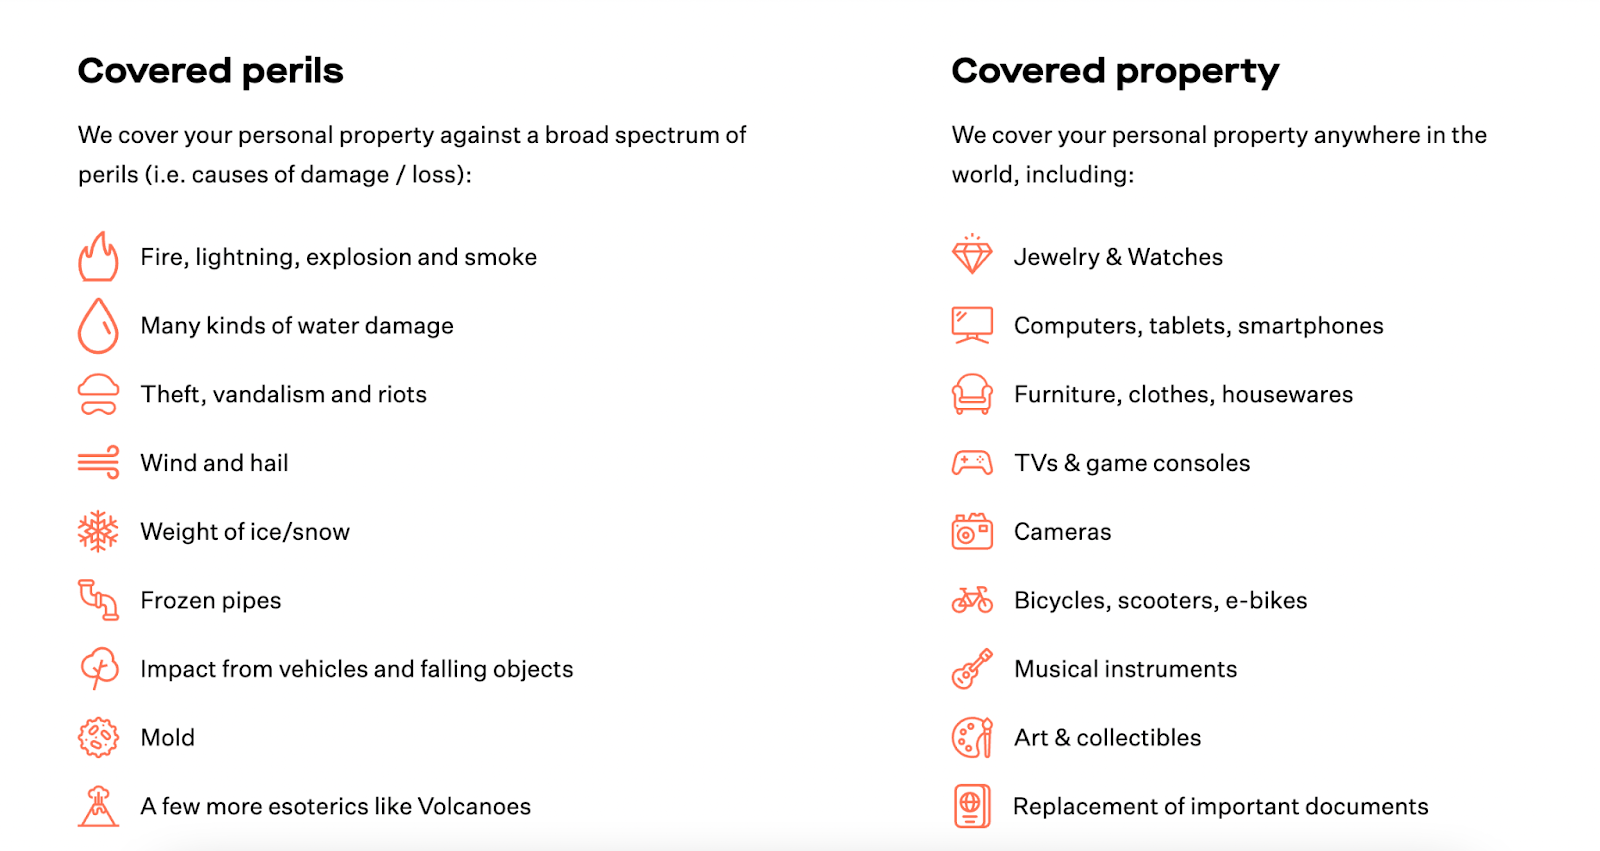 List of covered perils under Goodcover's renters insurance policy.